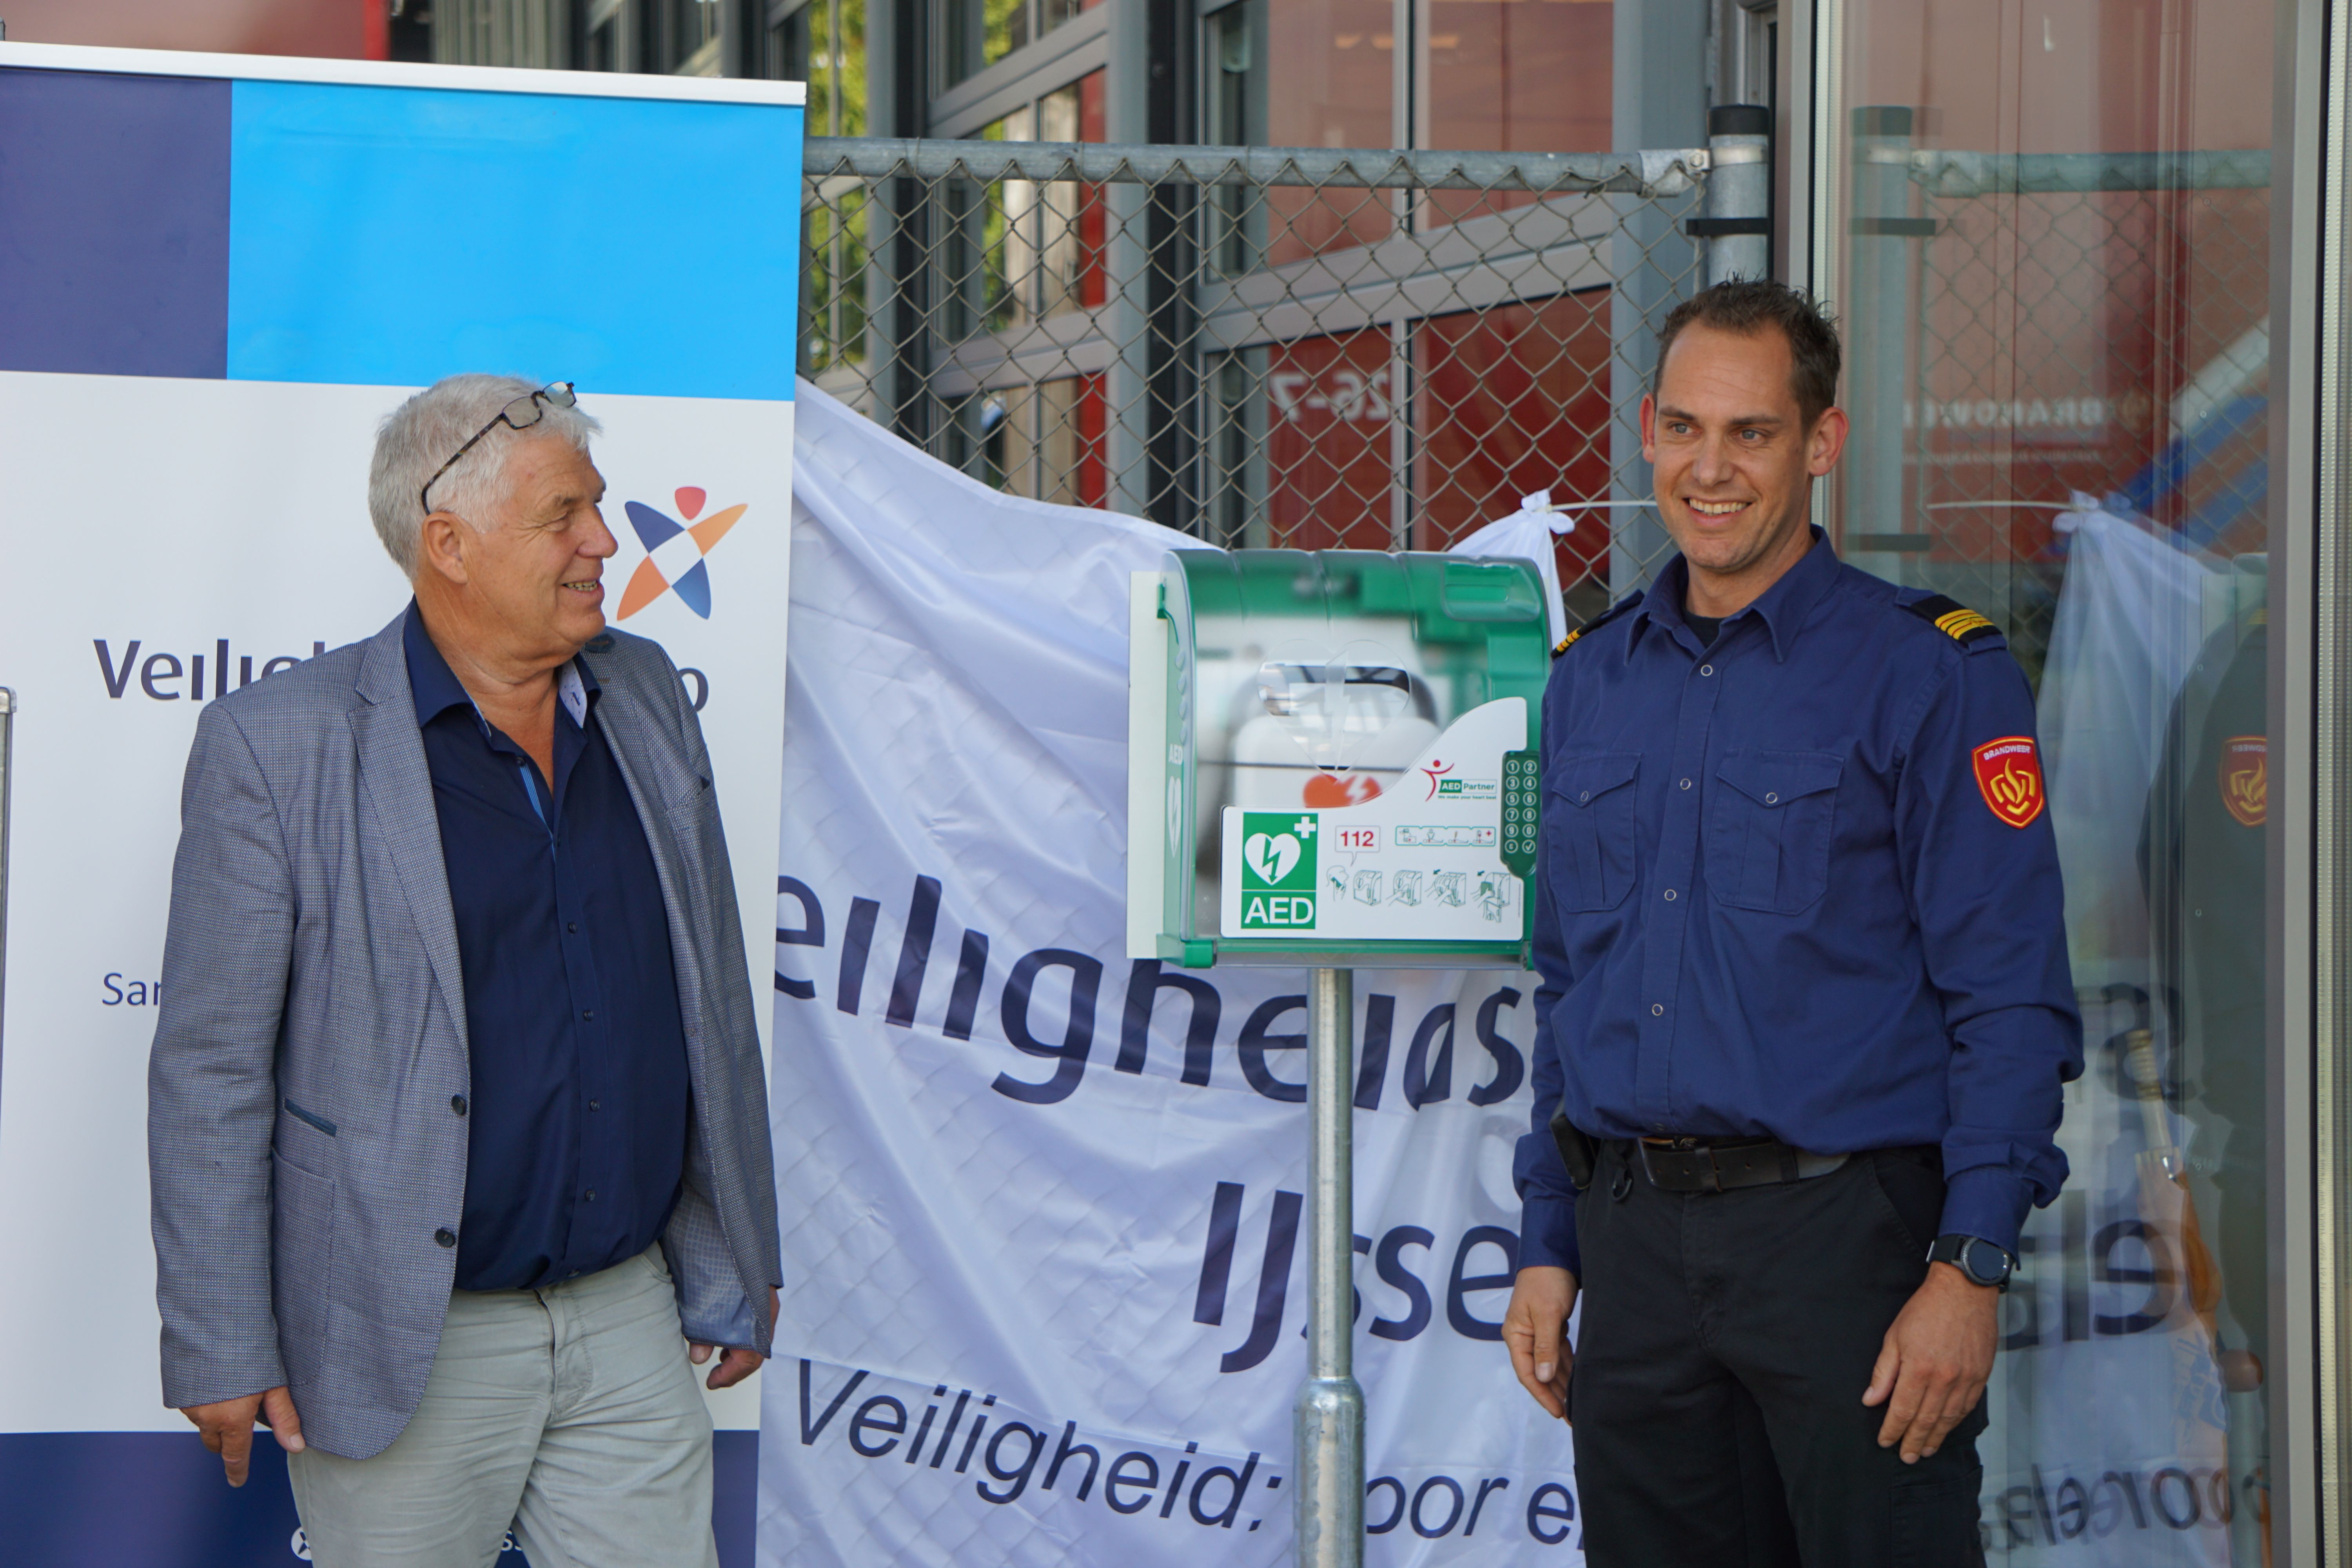 onthulling AED aan gevel kazerne